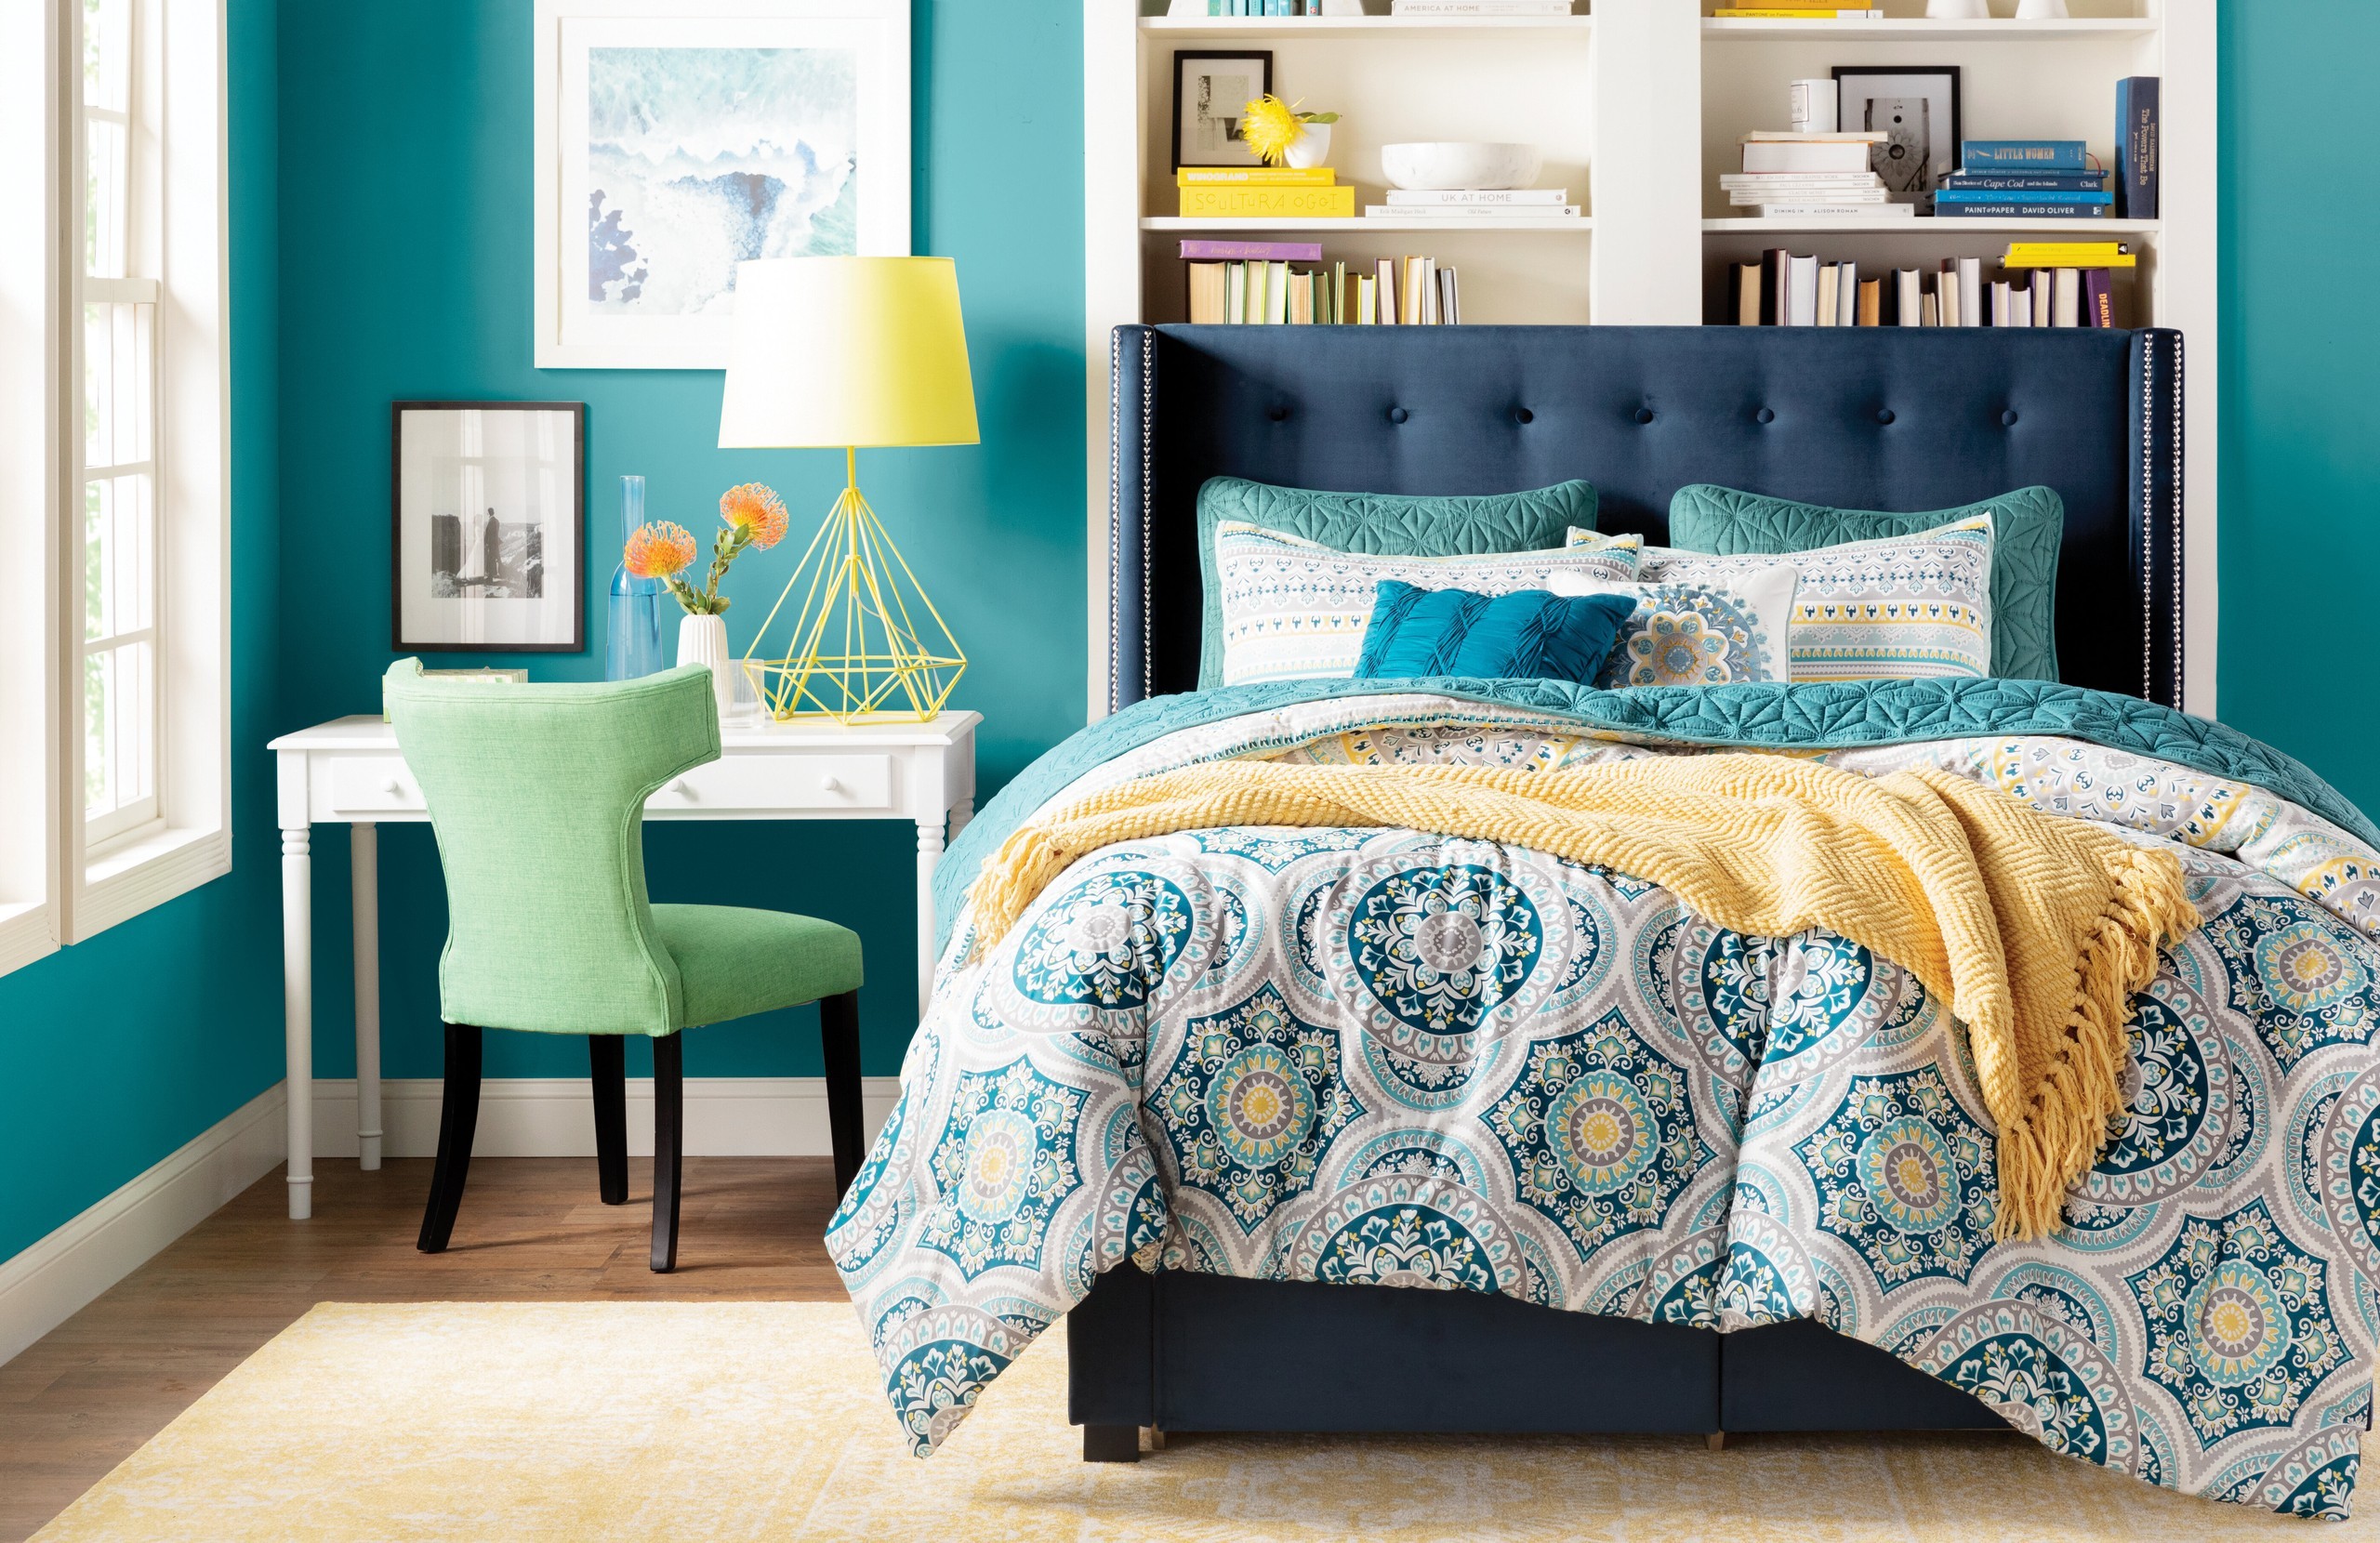 26 Colors That Go With Teal for a Bright Refresh